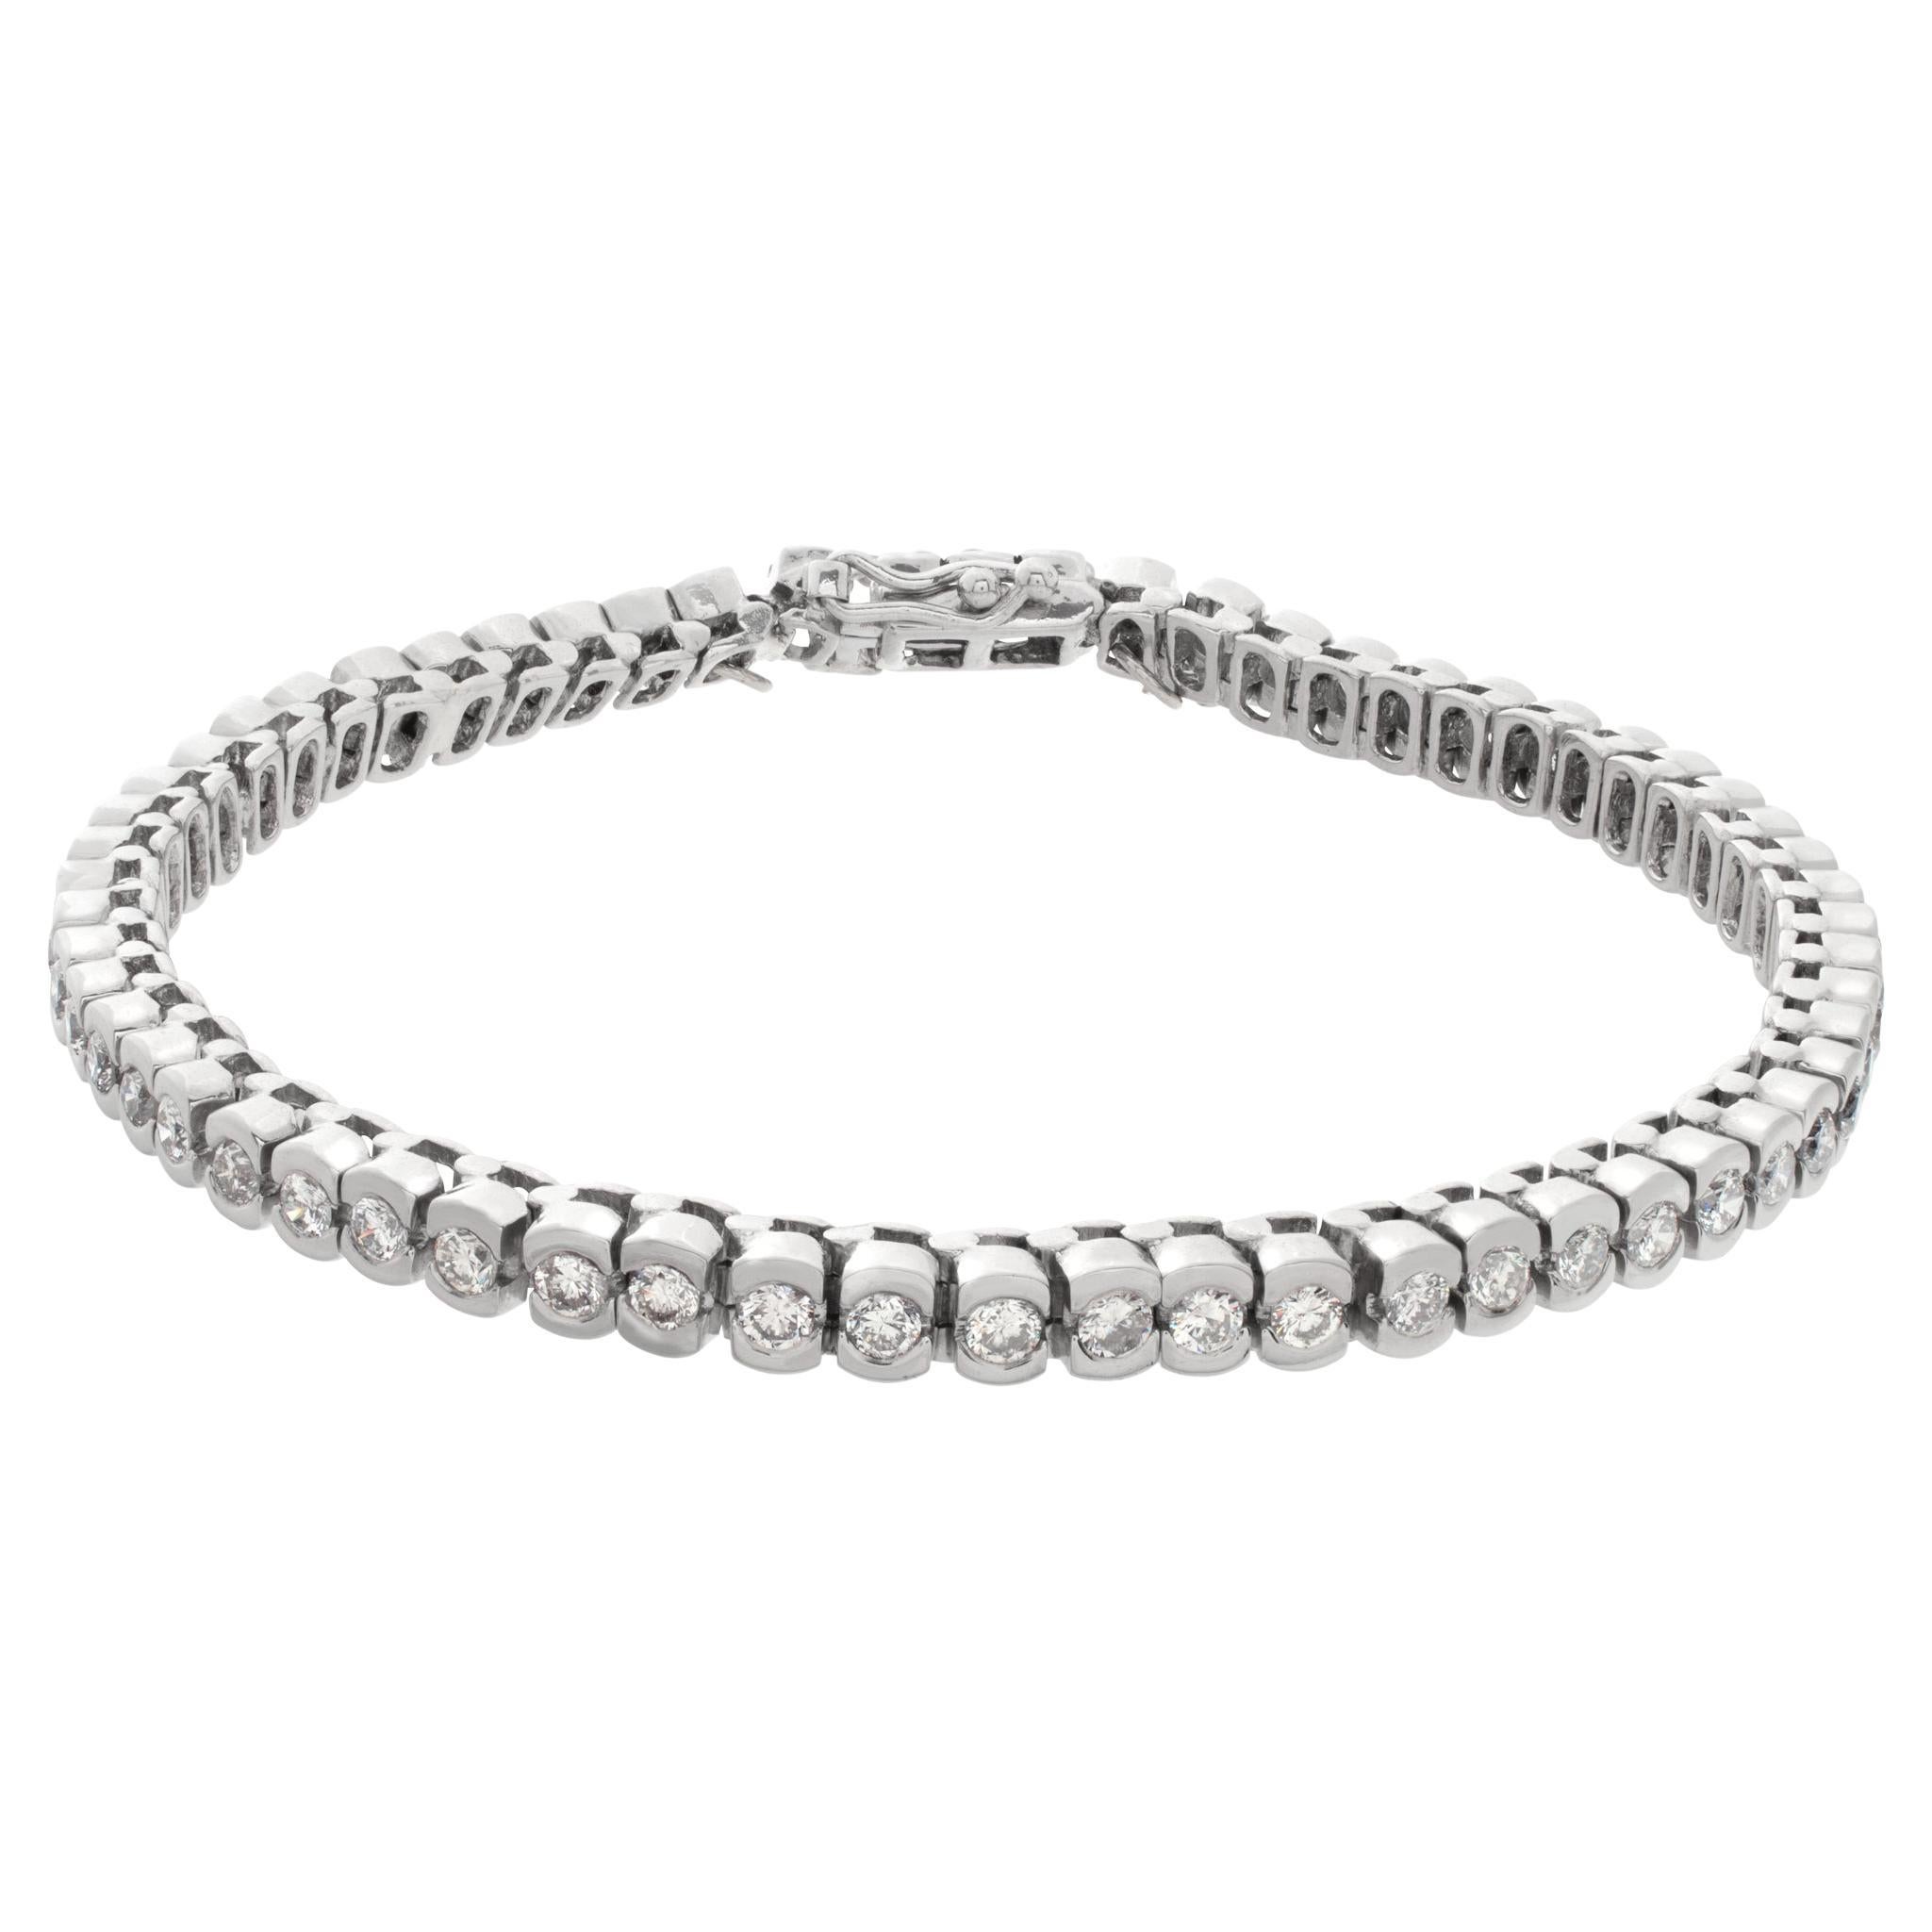 Diamond tennis bracelet in platinum with approximately 6 carats in round diamond For Sale